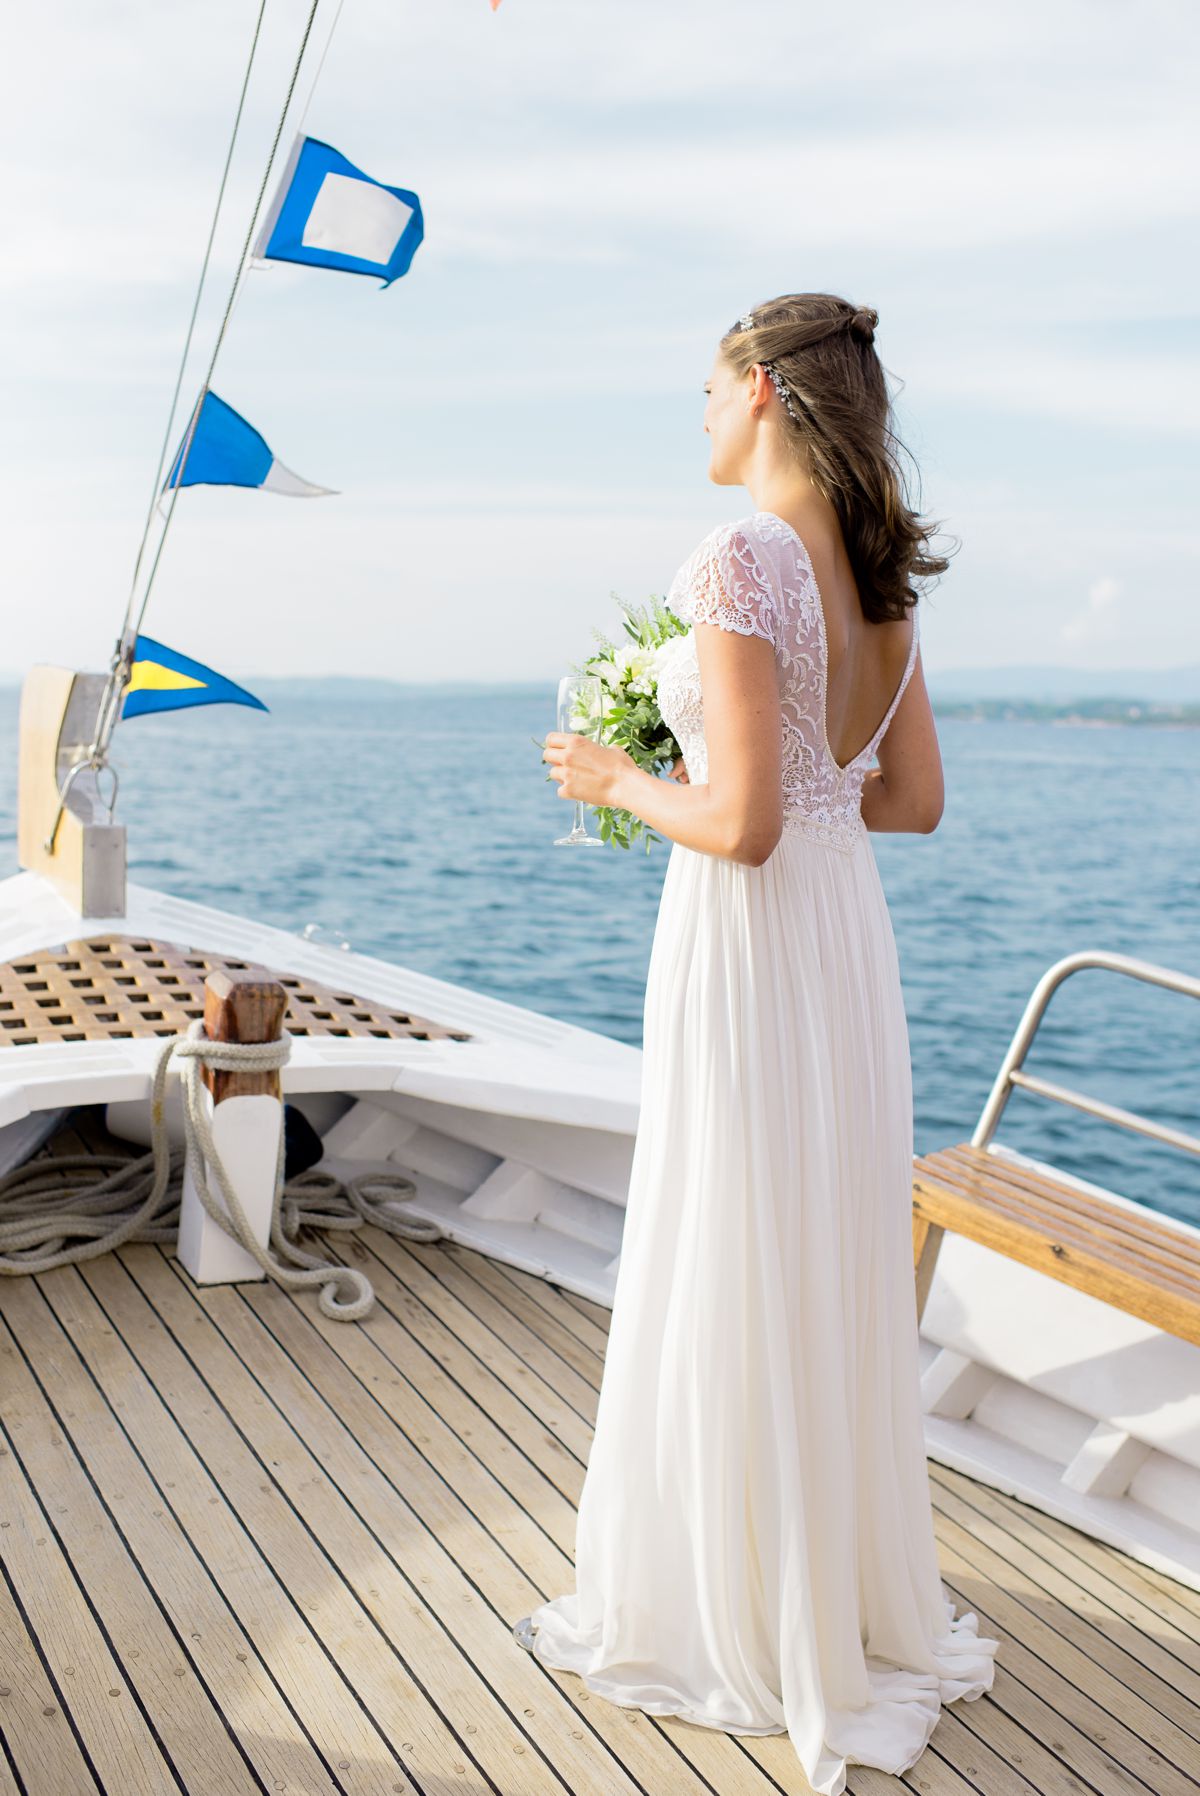 boat ride of bride during spetses wedding